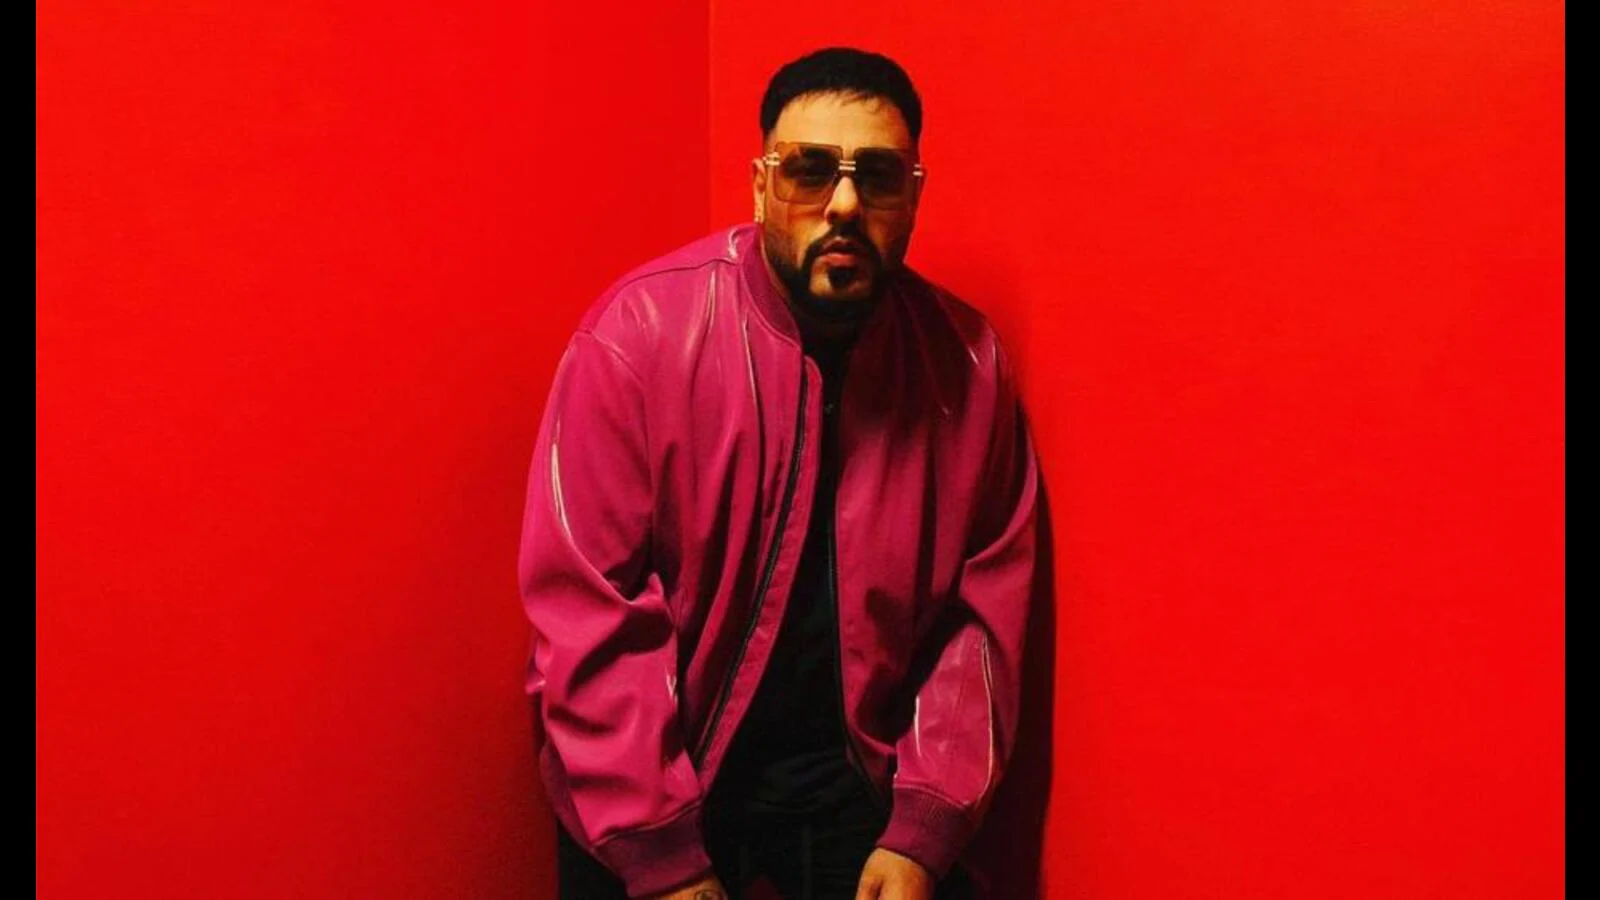 From sleep apnea to clinical depression: 10 things about Badshah